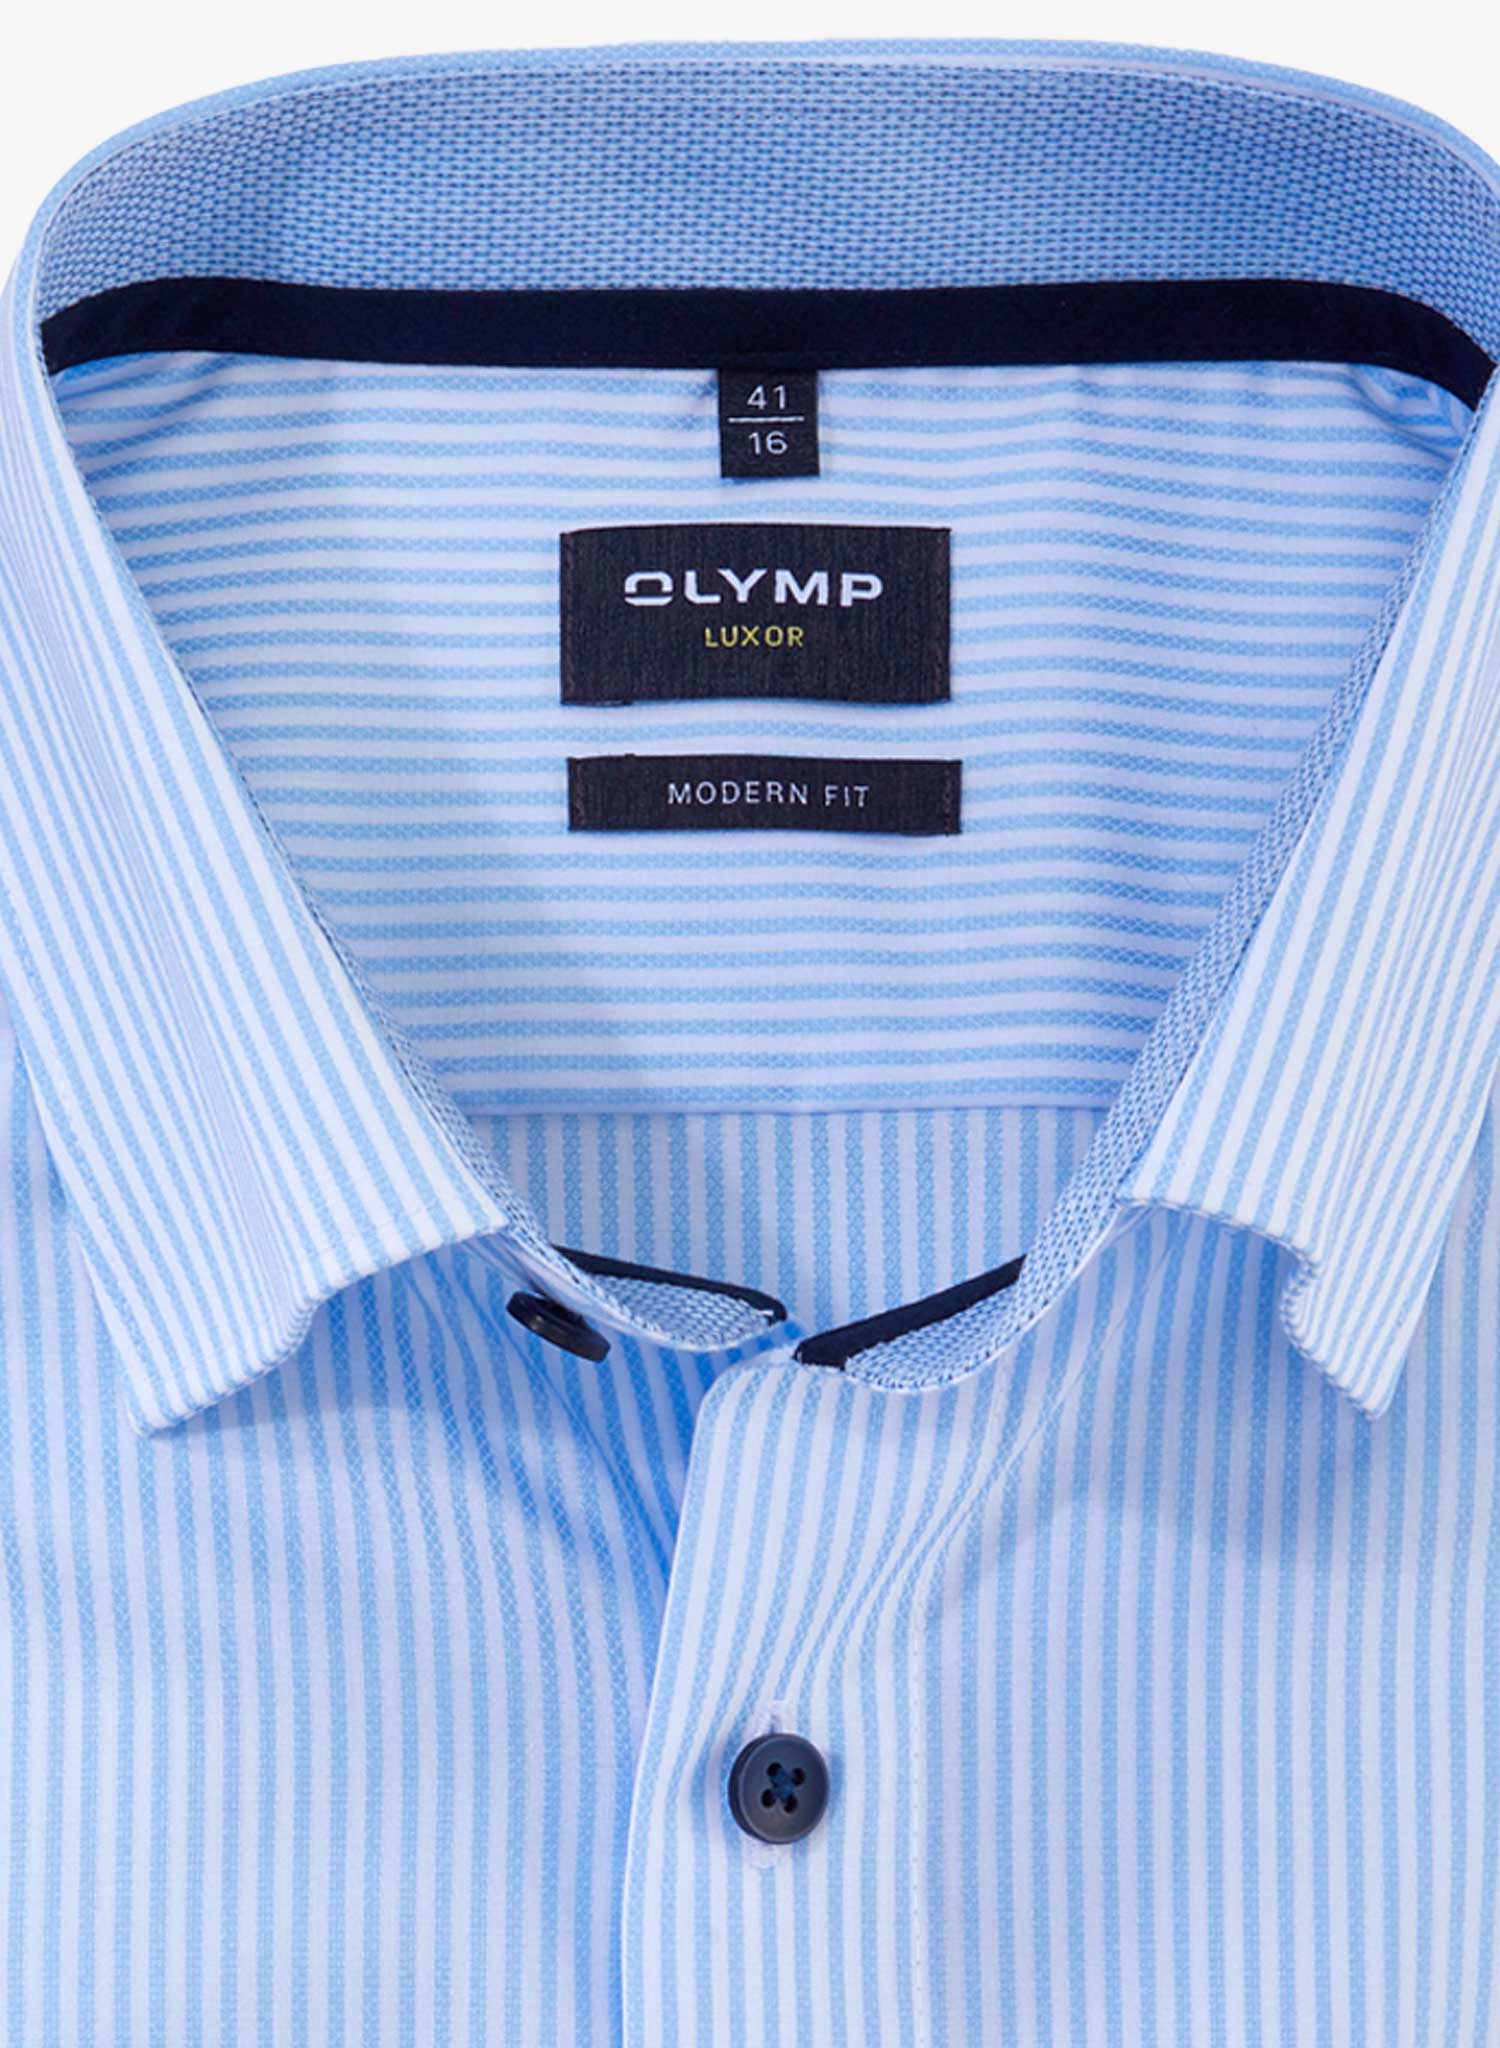 Olymp Luxor Light Stripe Modern Fit Long Sleeve Shirt Blue Folded Front Cropped to show Collar